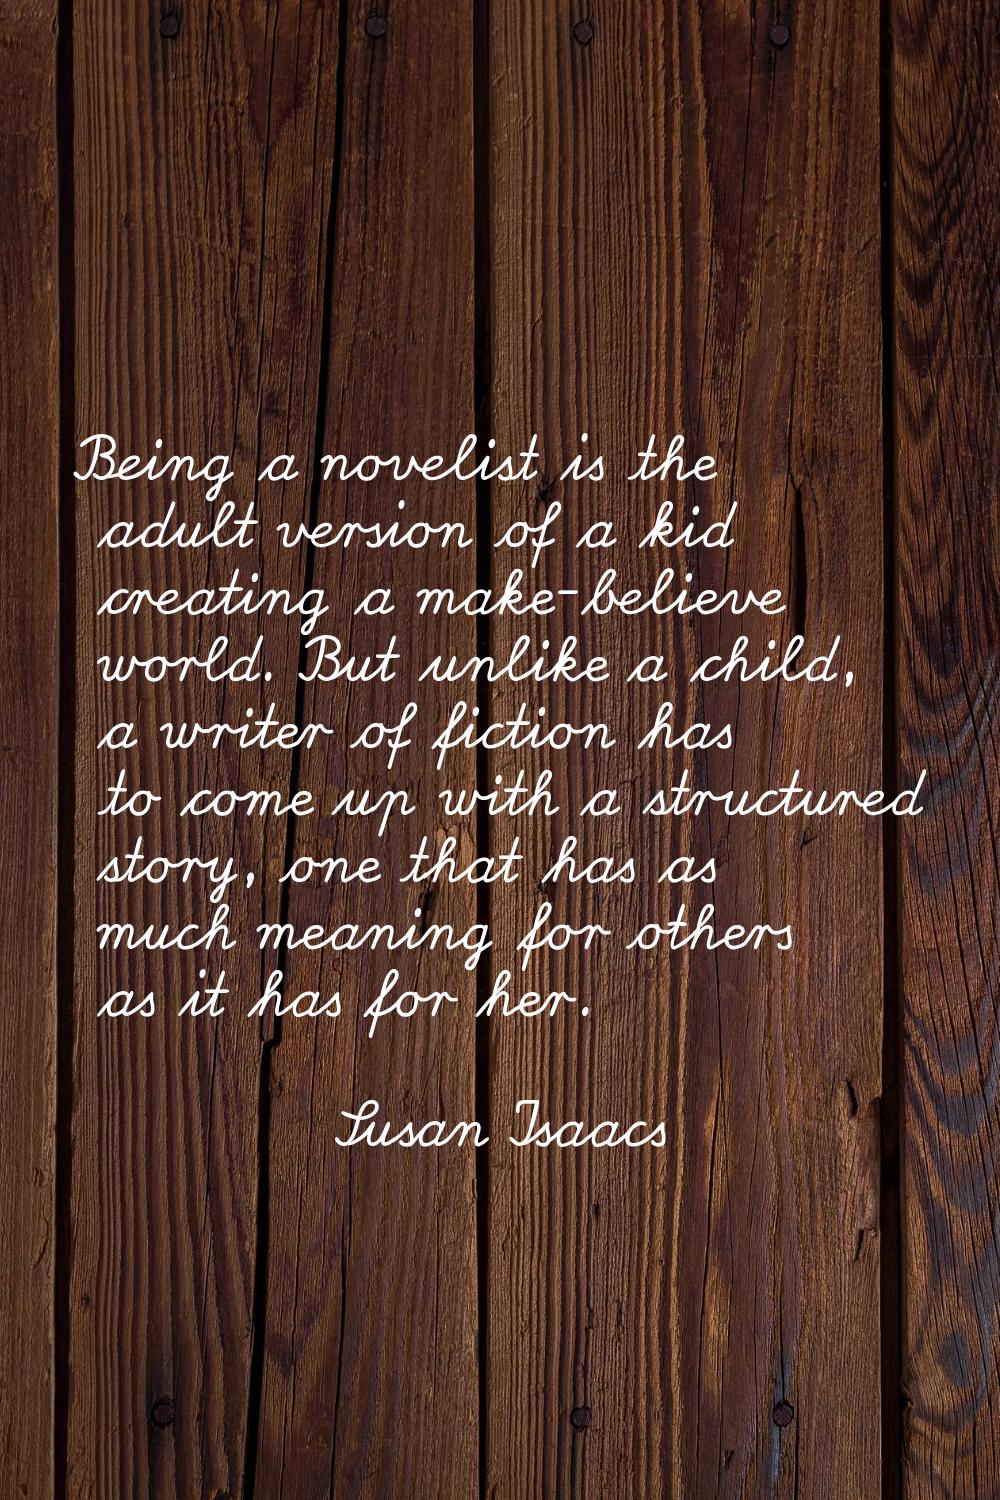 Being a novelist is the adult version of a kid creating a make-believe world. But unlike a child, a